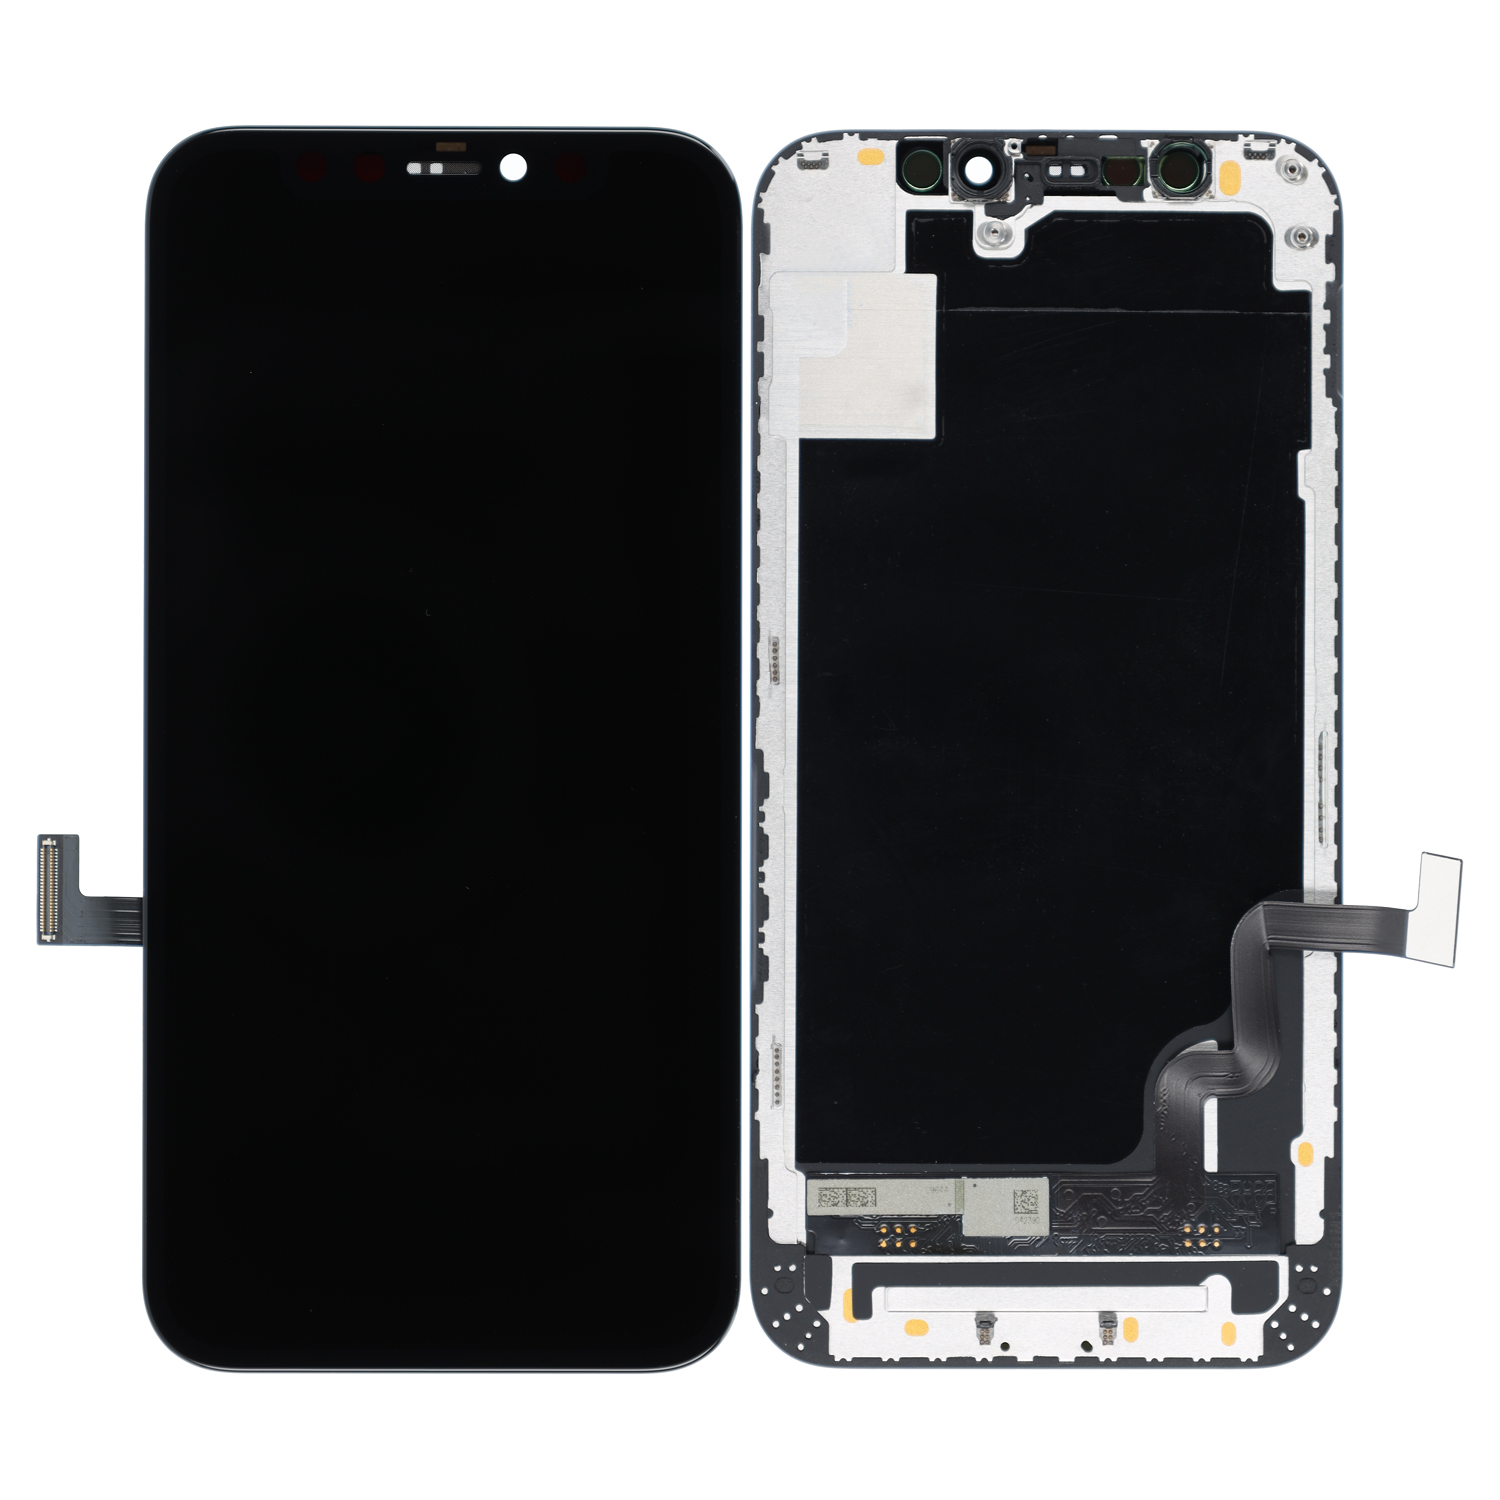 LCD Display compatible with iPhone 12 Mini A+++, incl Diplay Adhesive Sticker